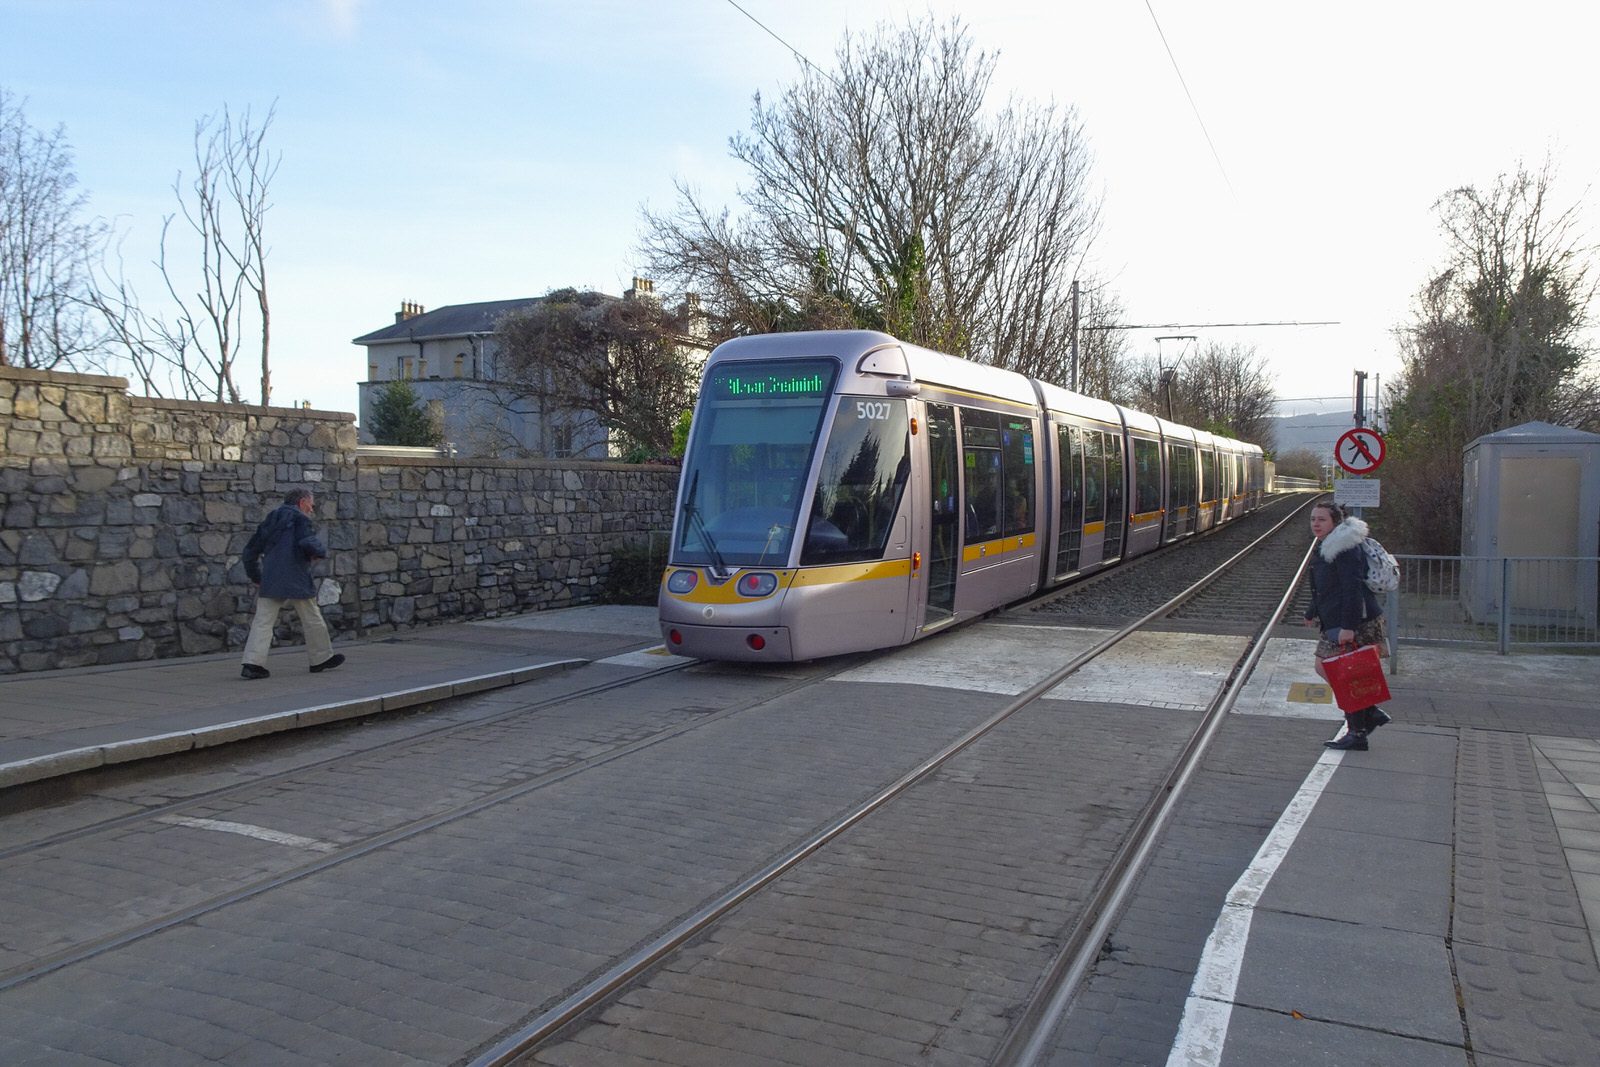 THE MILLTOWN LUAS TRAM STOP A FEW DAYS BEFORE CHRISTMAS DAY [AND NEARBY]-226269-1